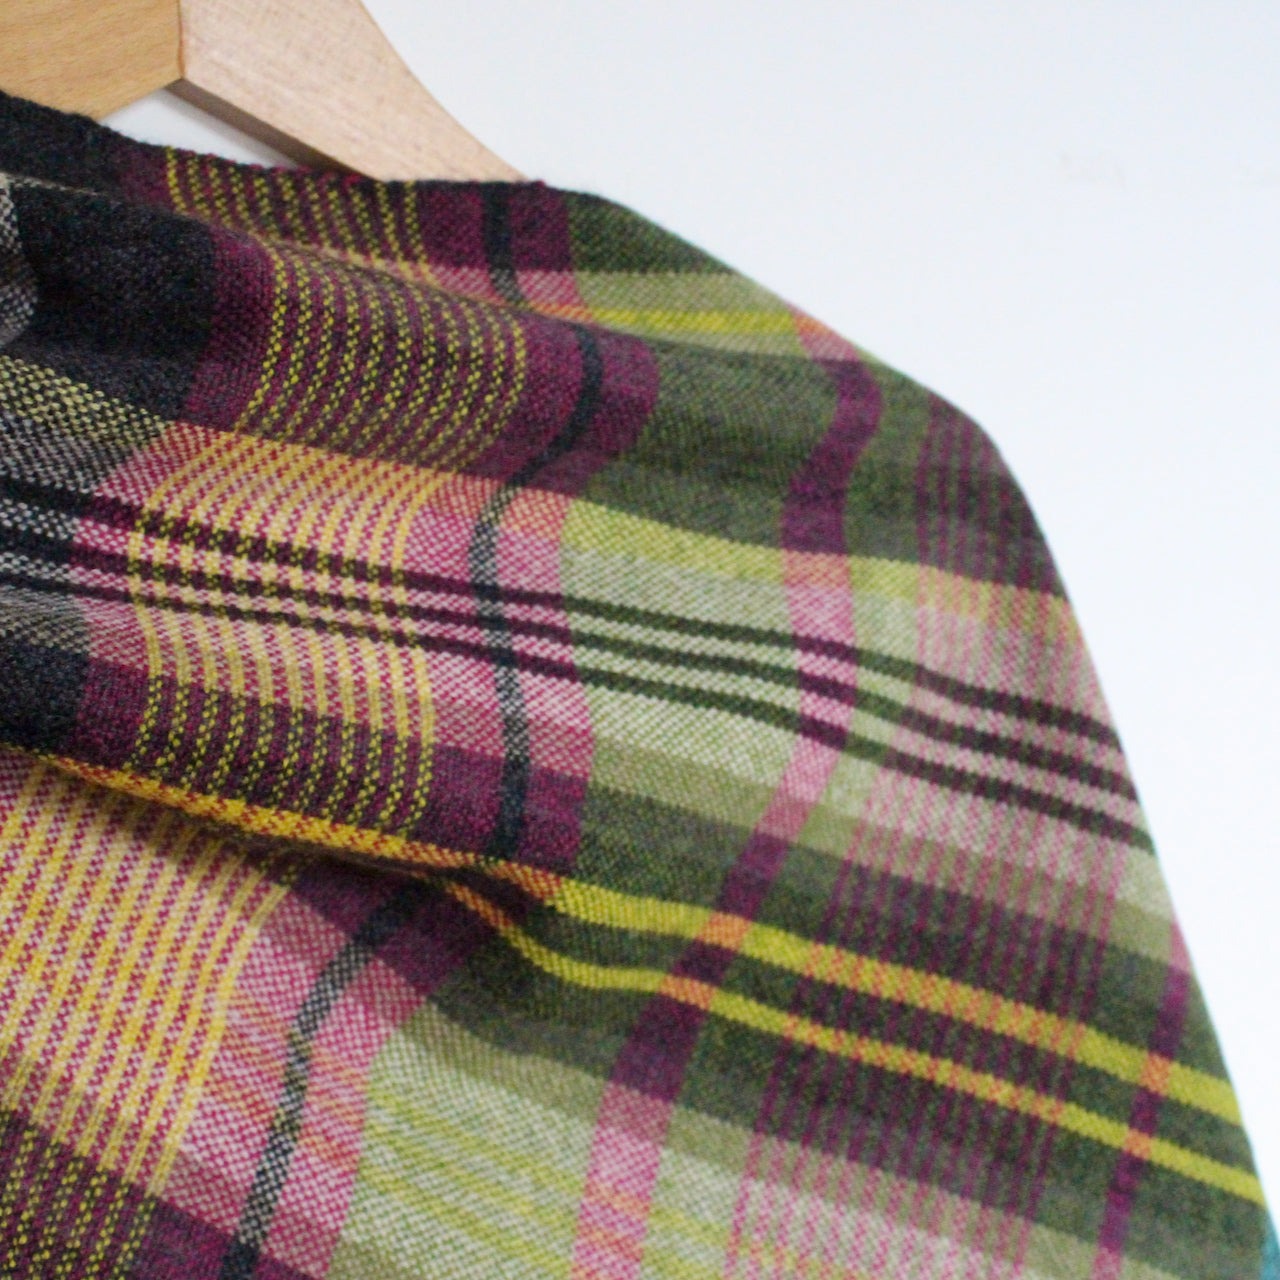 close up detail of a handwoven woollen scarf by Teresa Dunne Cornish textile artist in pink, green, purple and black 